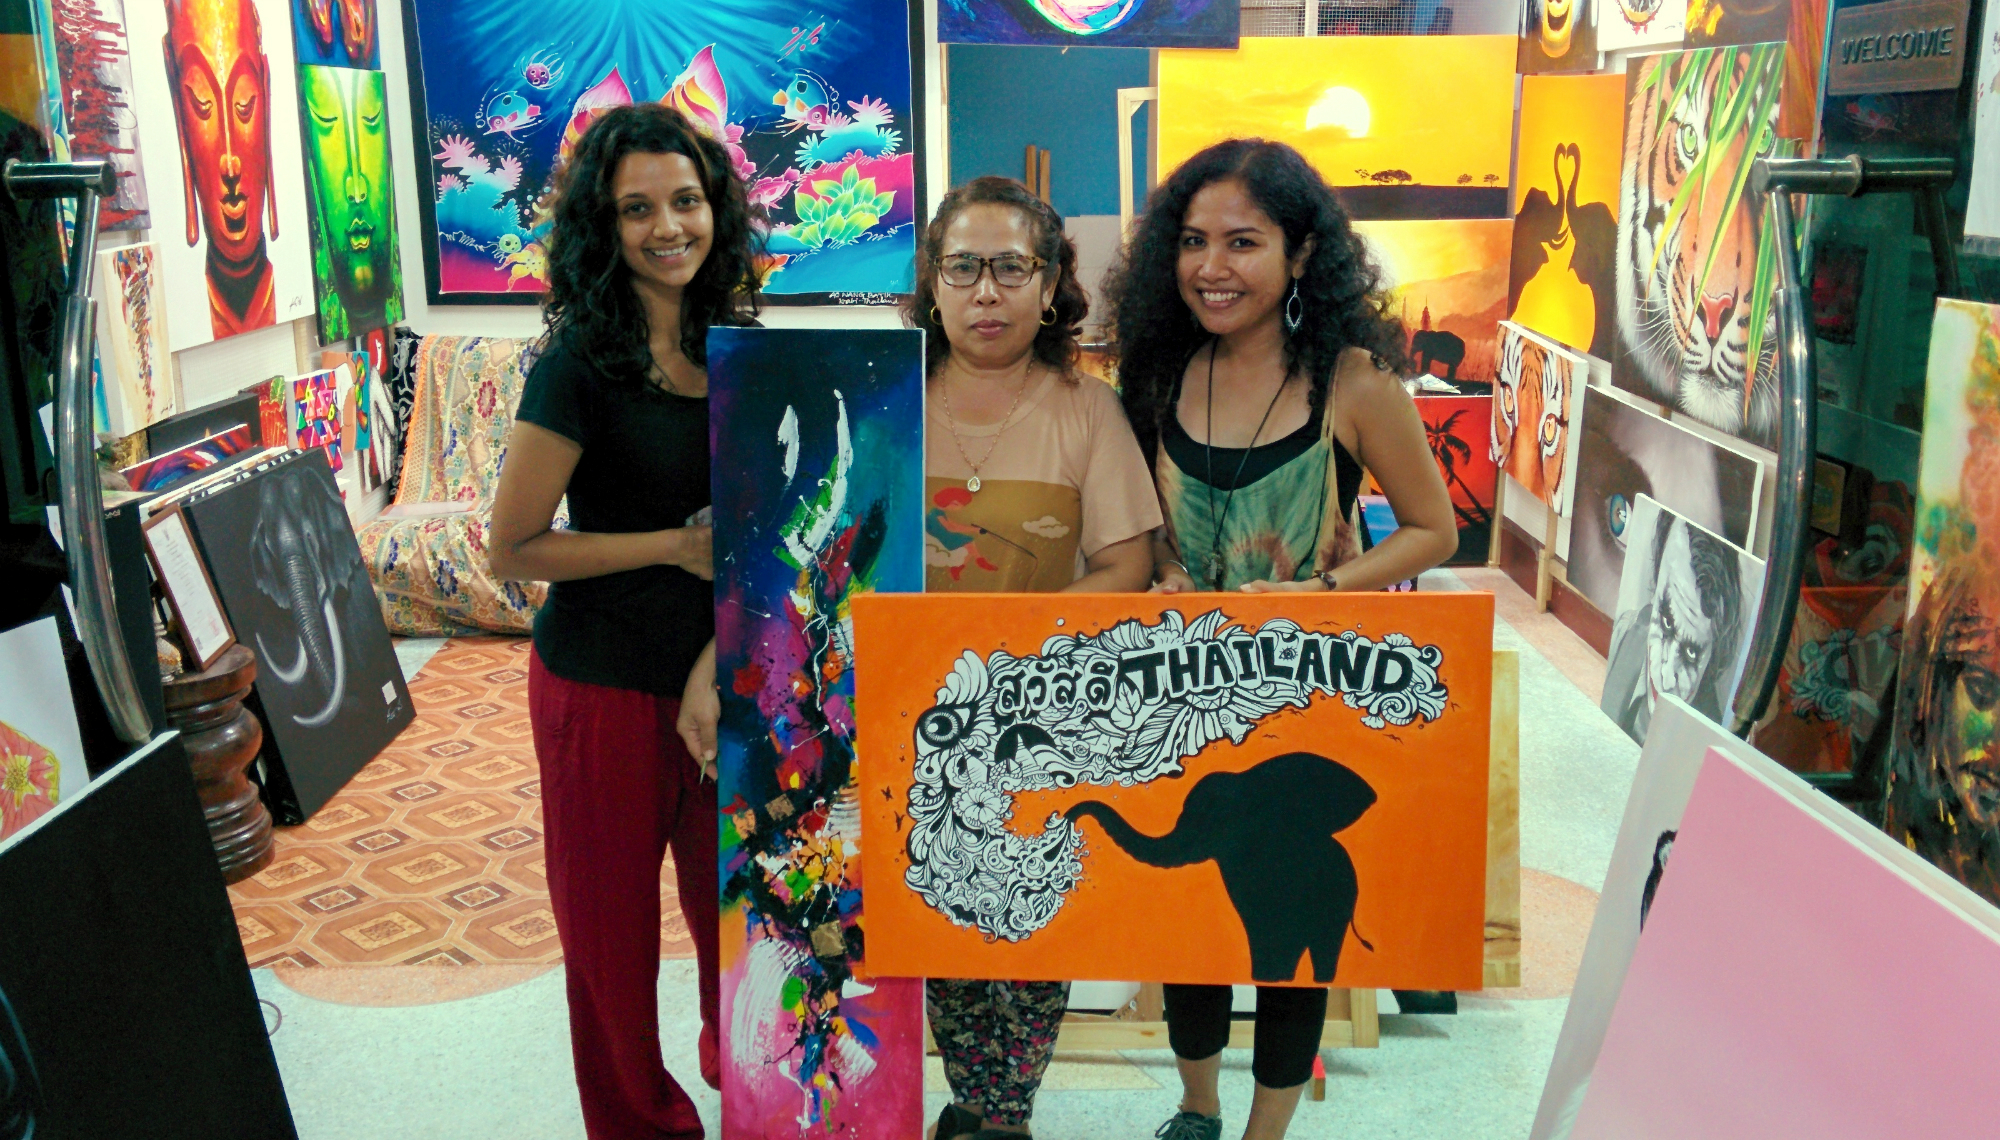 The wonderful artist Dao on the far right with her mum in the middle. The middle colourful piece is Kyles and the Thailand piece is mine :)